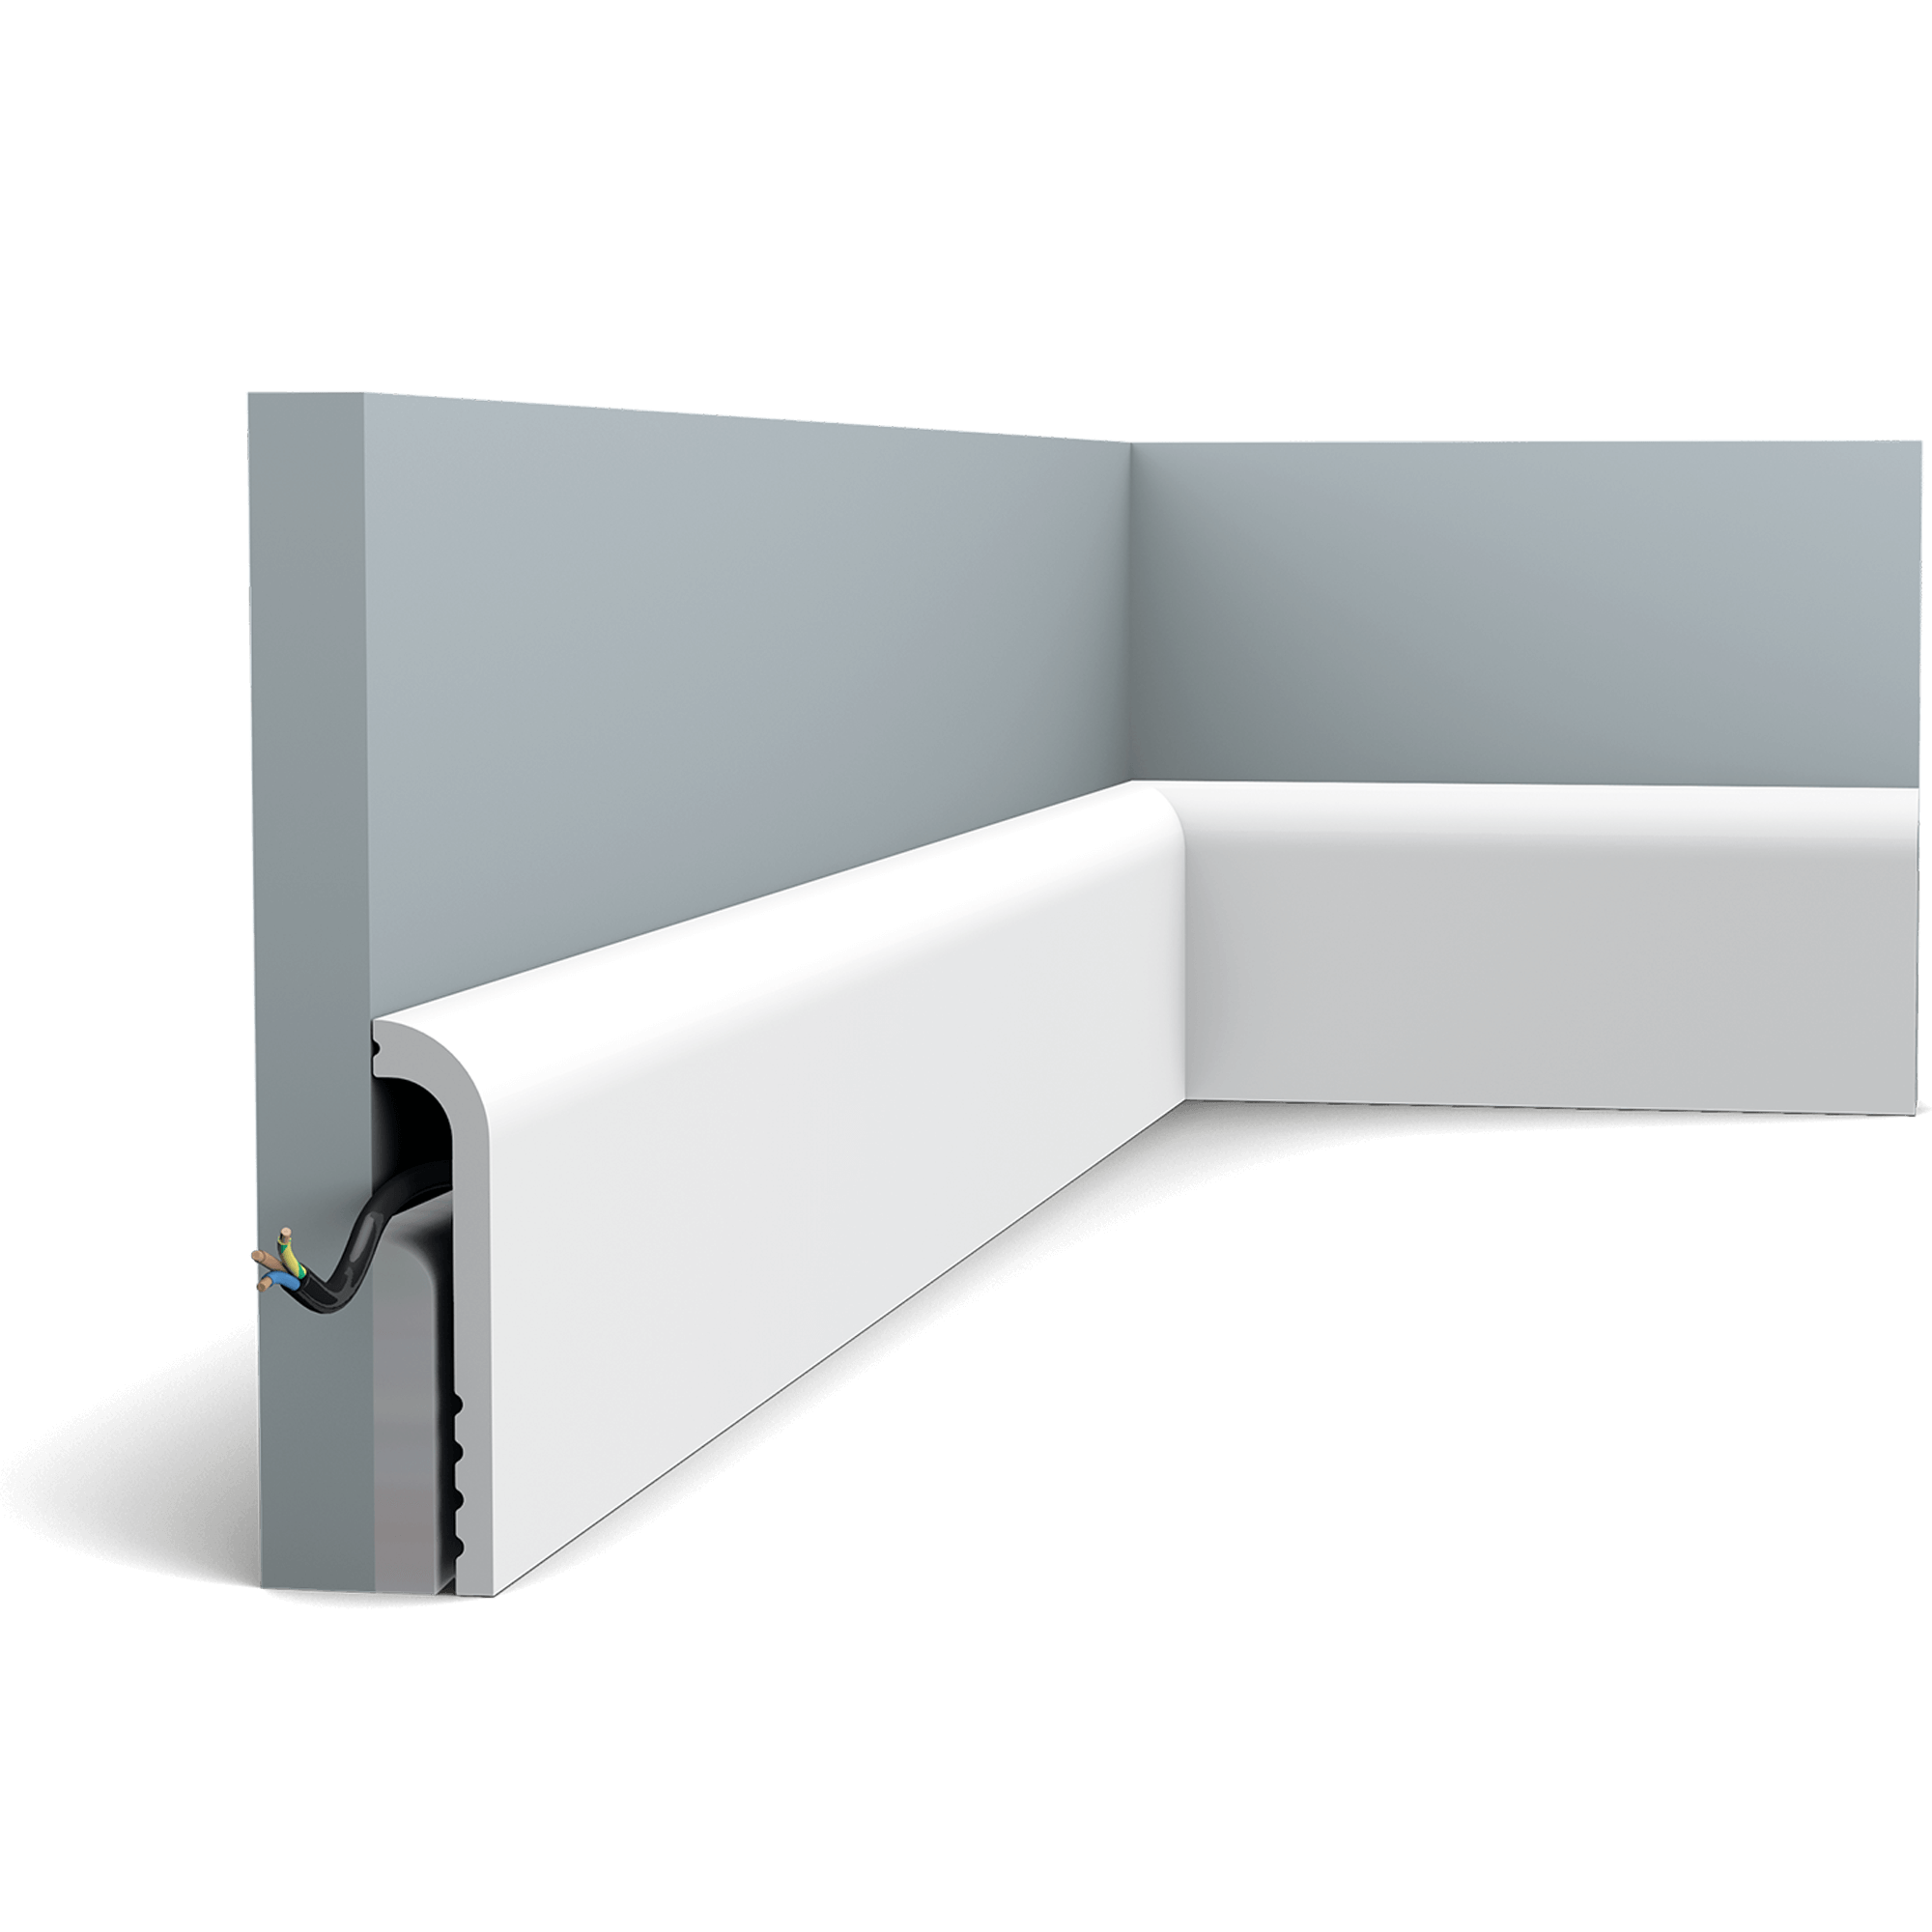 This water-resistant and paintable cover skirting is ideal for renovations. Designed to be installed on top of existing skirting boards (1.7 x 9.5 cm max.). Old or damaged skirting boards that are difficult to remove are obstacles no more.